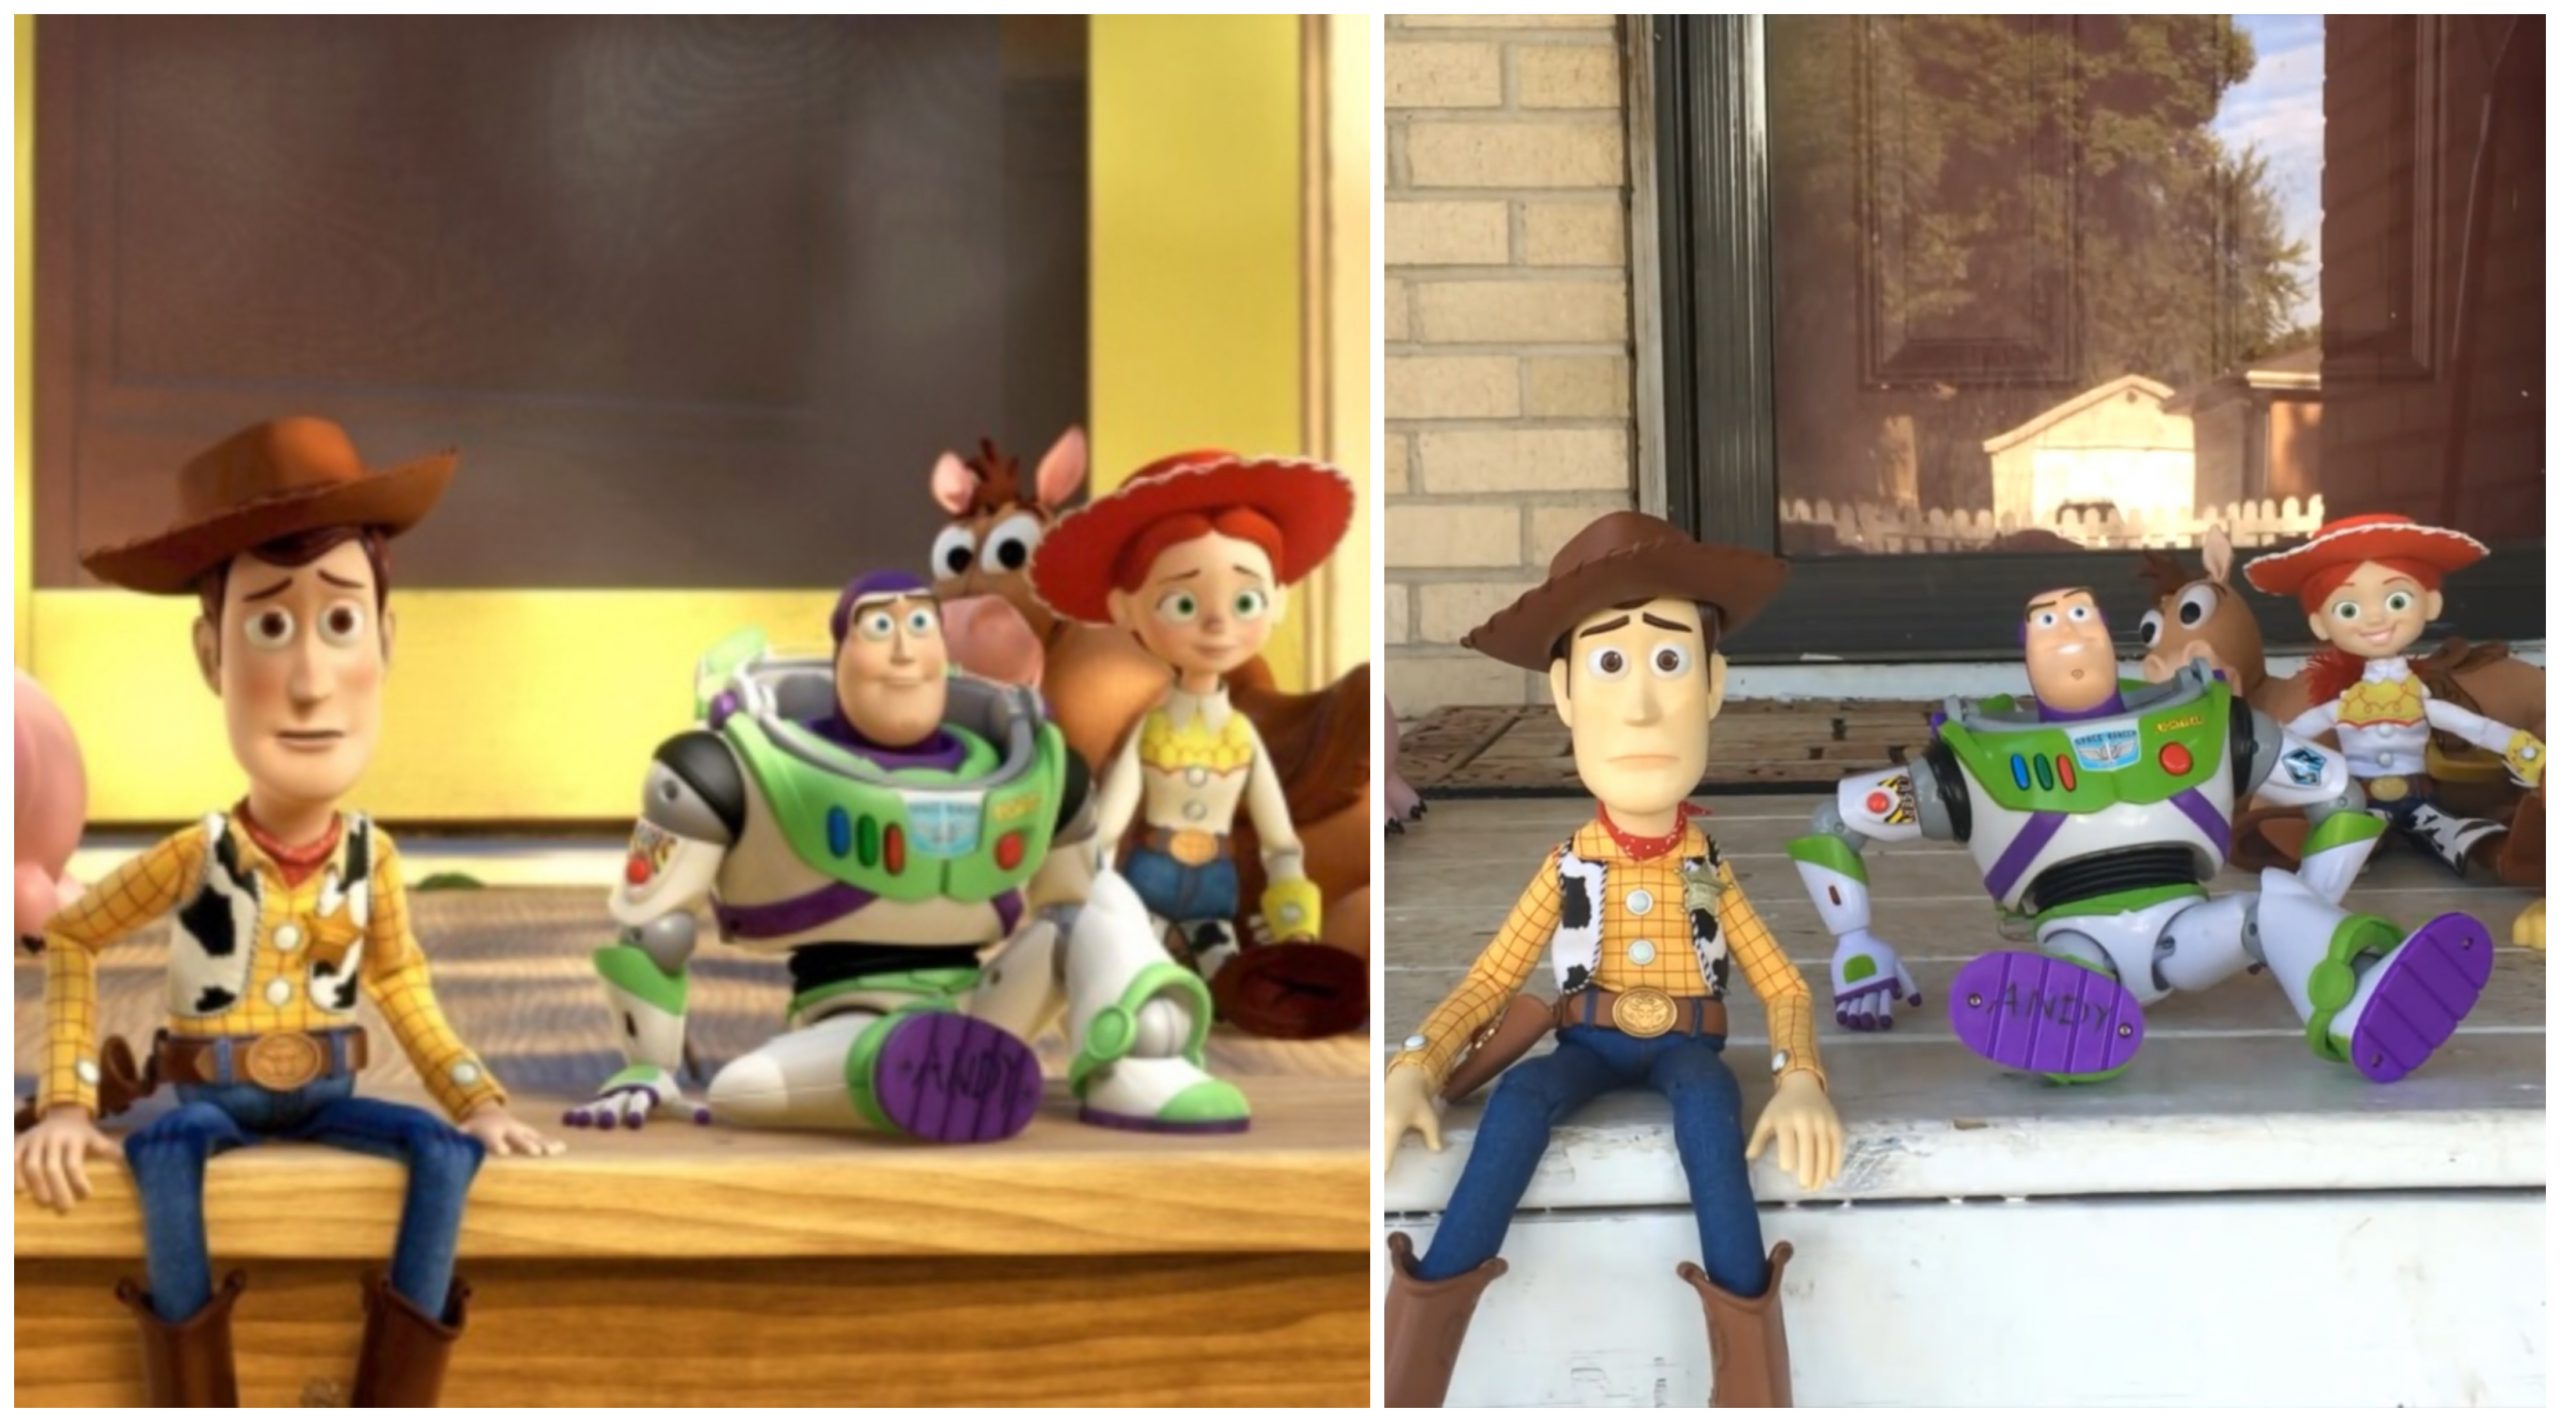 Two Brothers Spent 8-Years Recreating ‘Toy Story 3’ With Real Life Toys